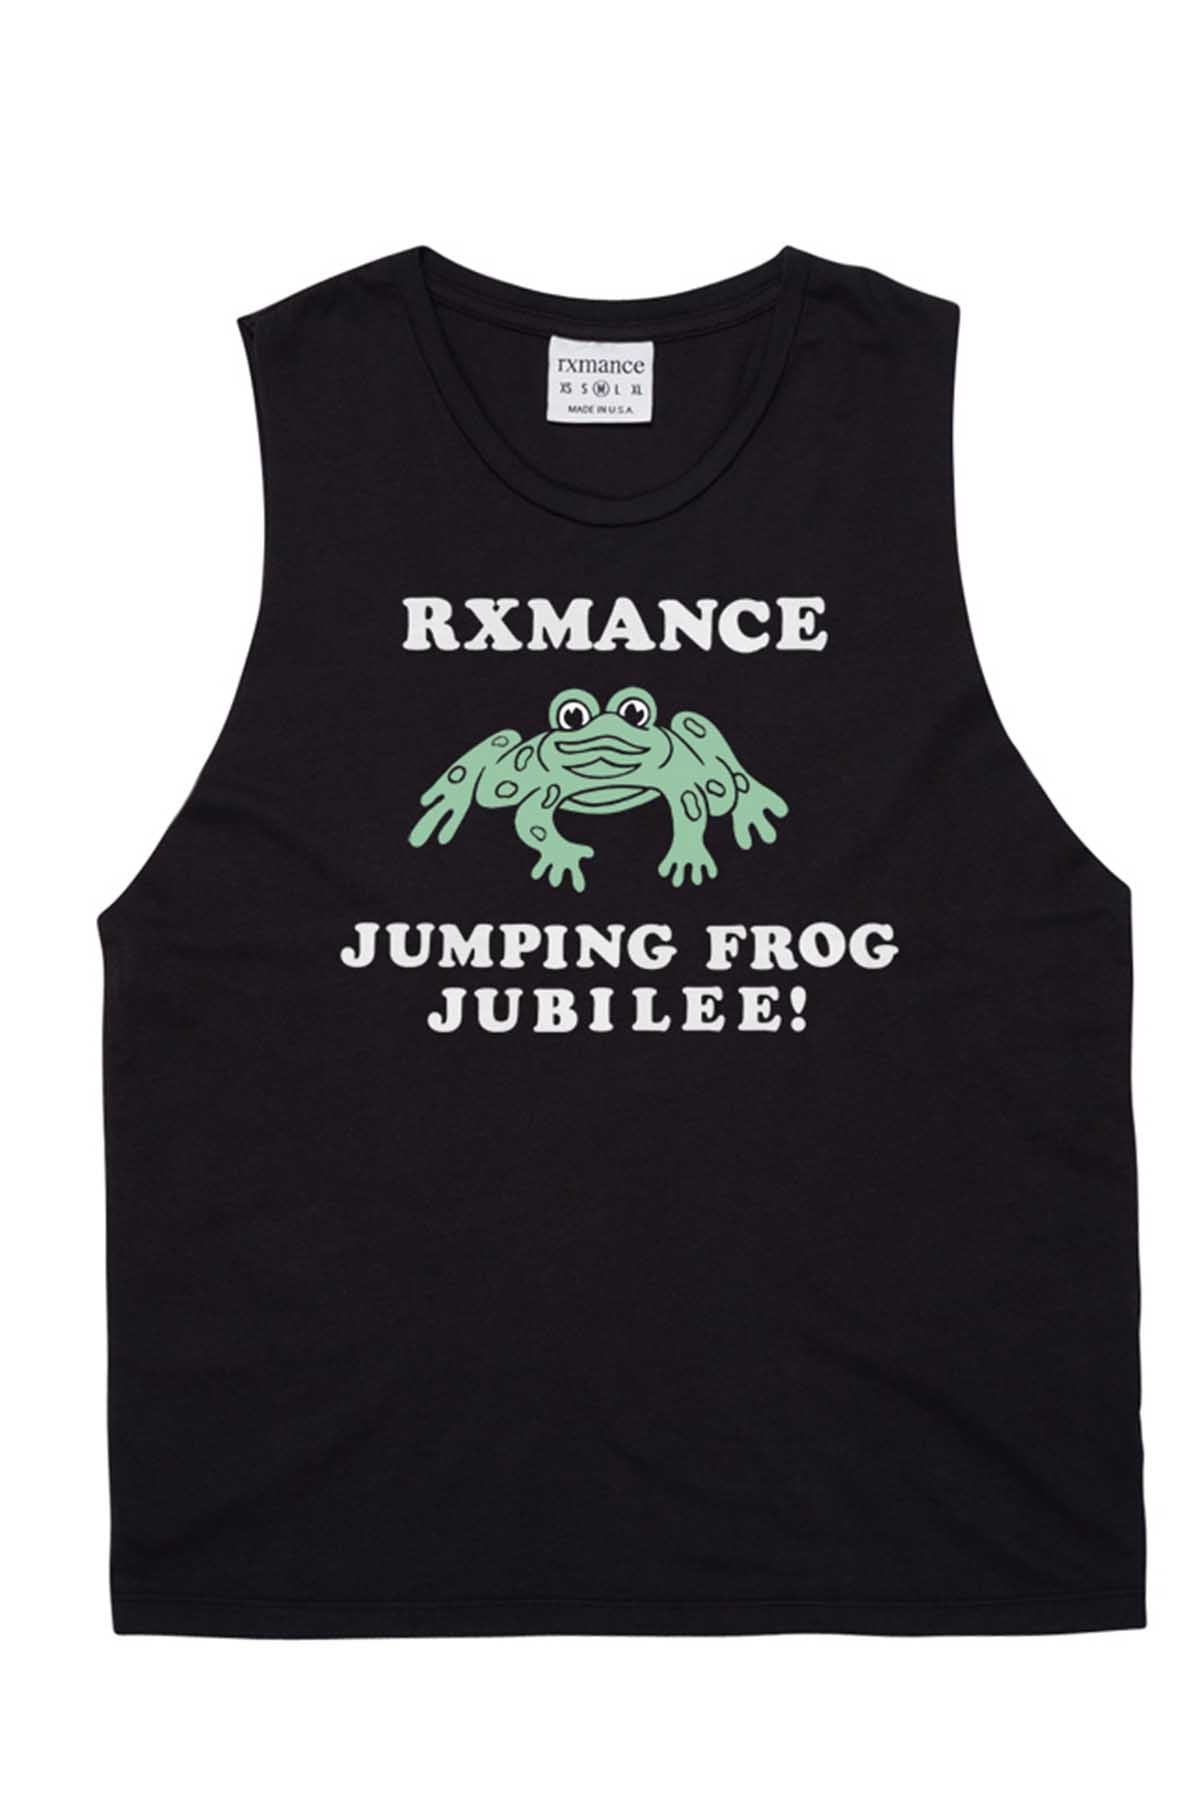 Rxmance Unisex Black Jumping Frog Muscle T